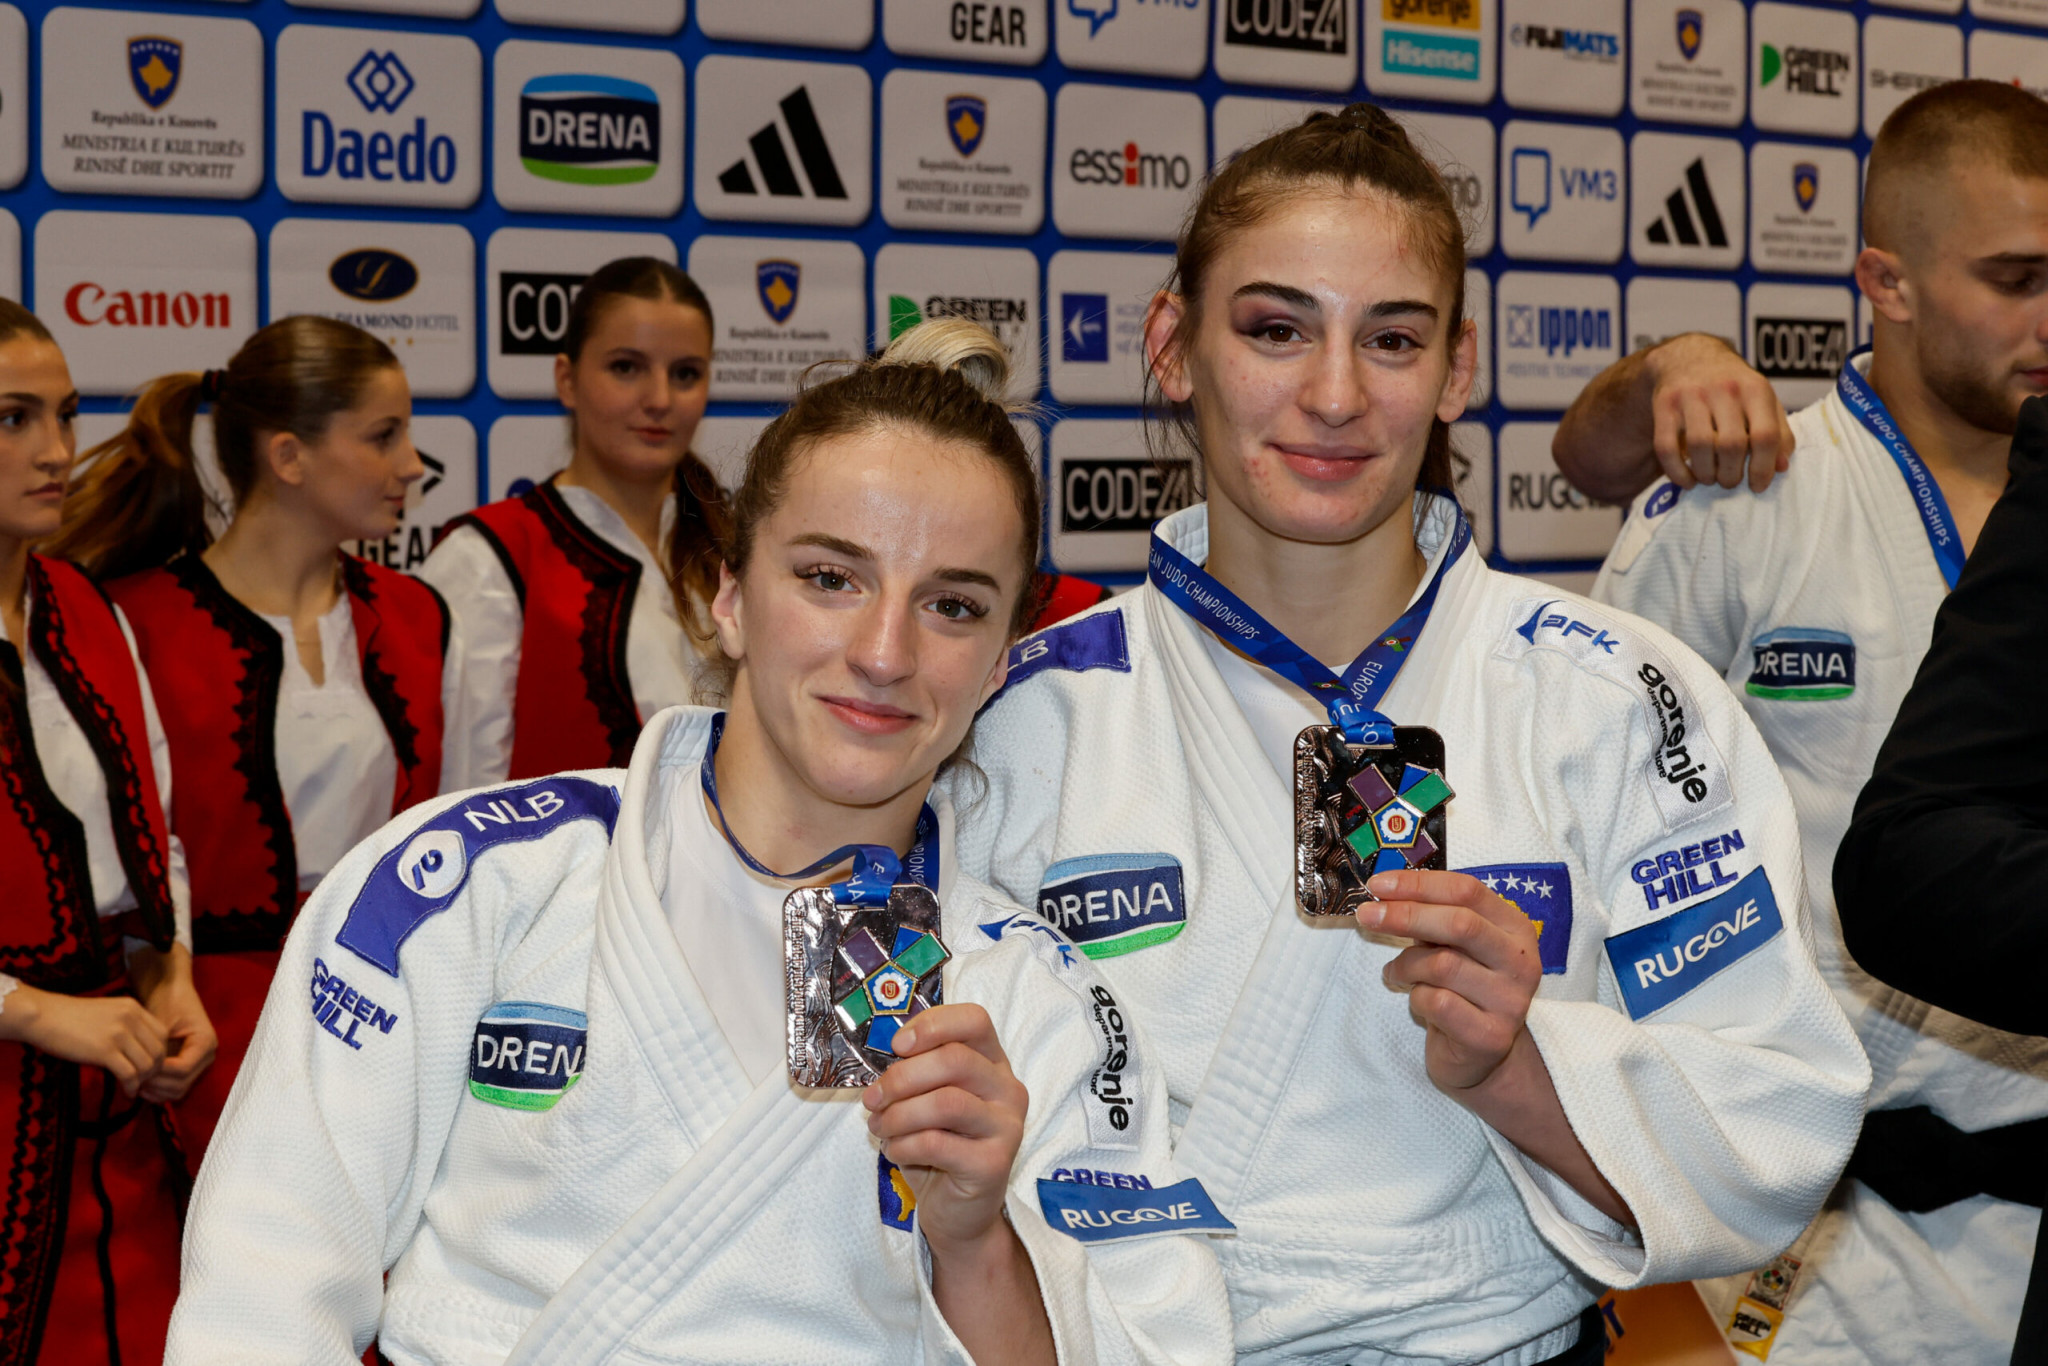 Distria Krasniqi (from the left) and Nora Gjakova after the award ceremony at the European Championships Open in Pristina © EJU Media